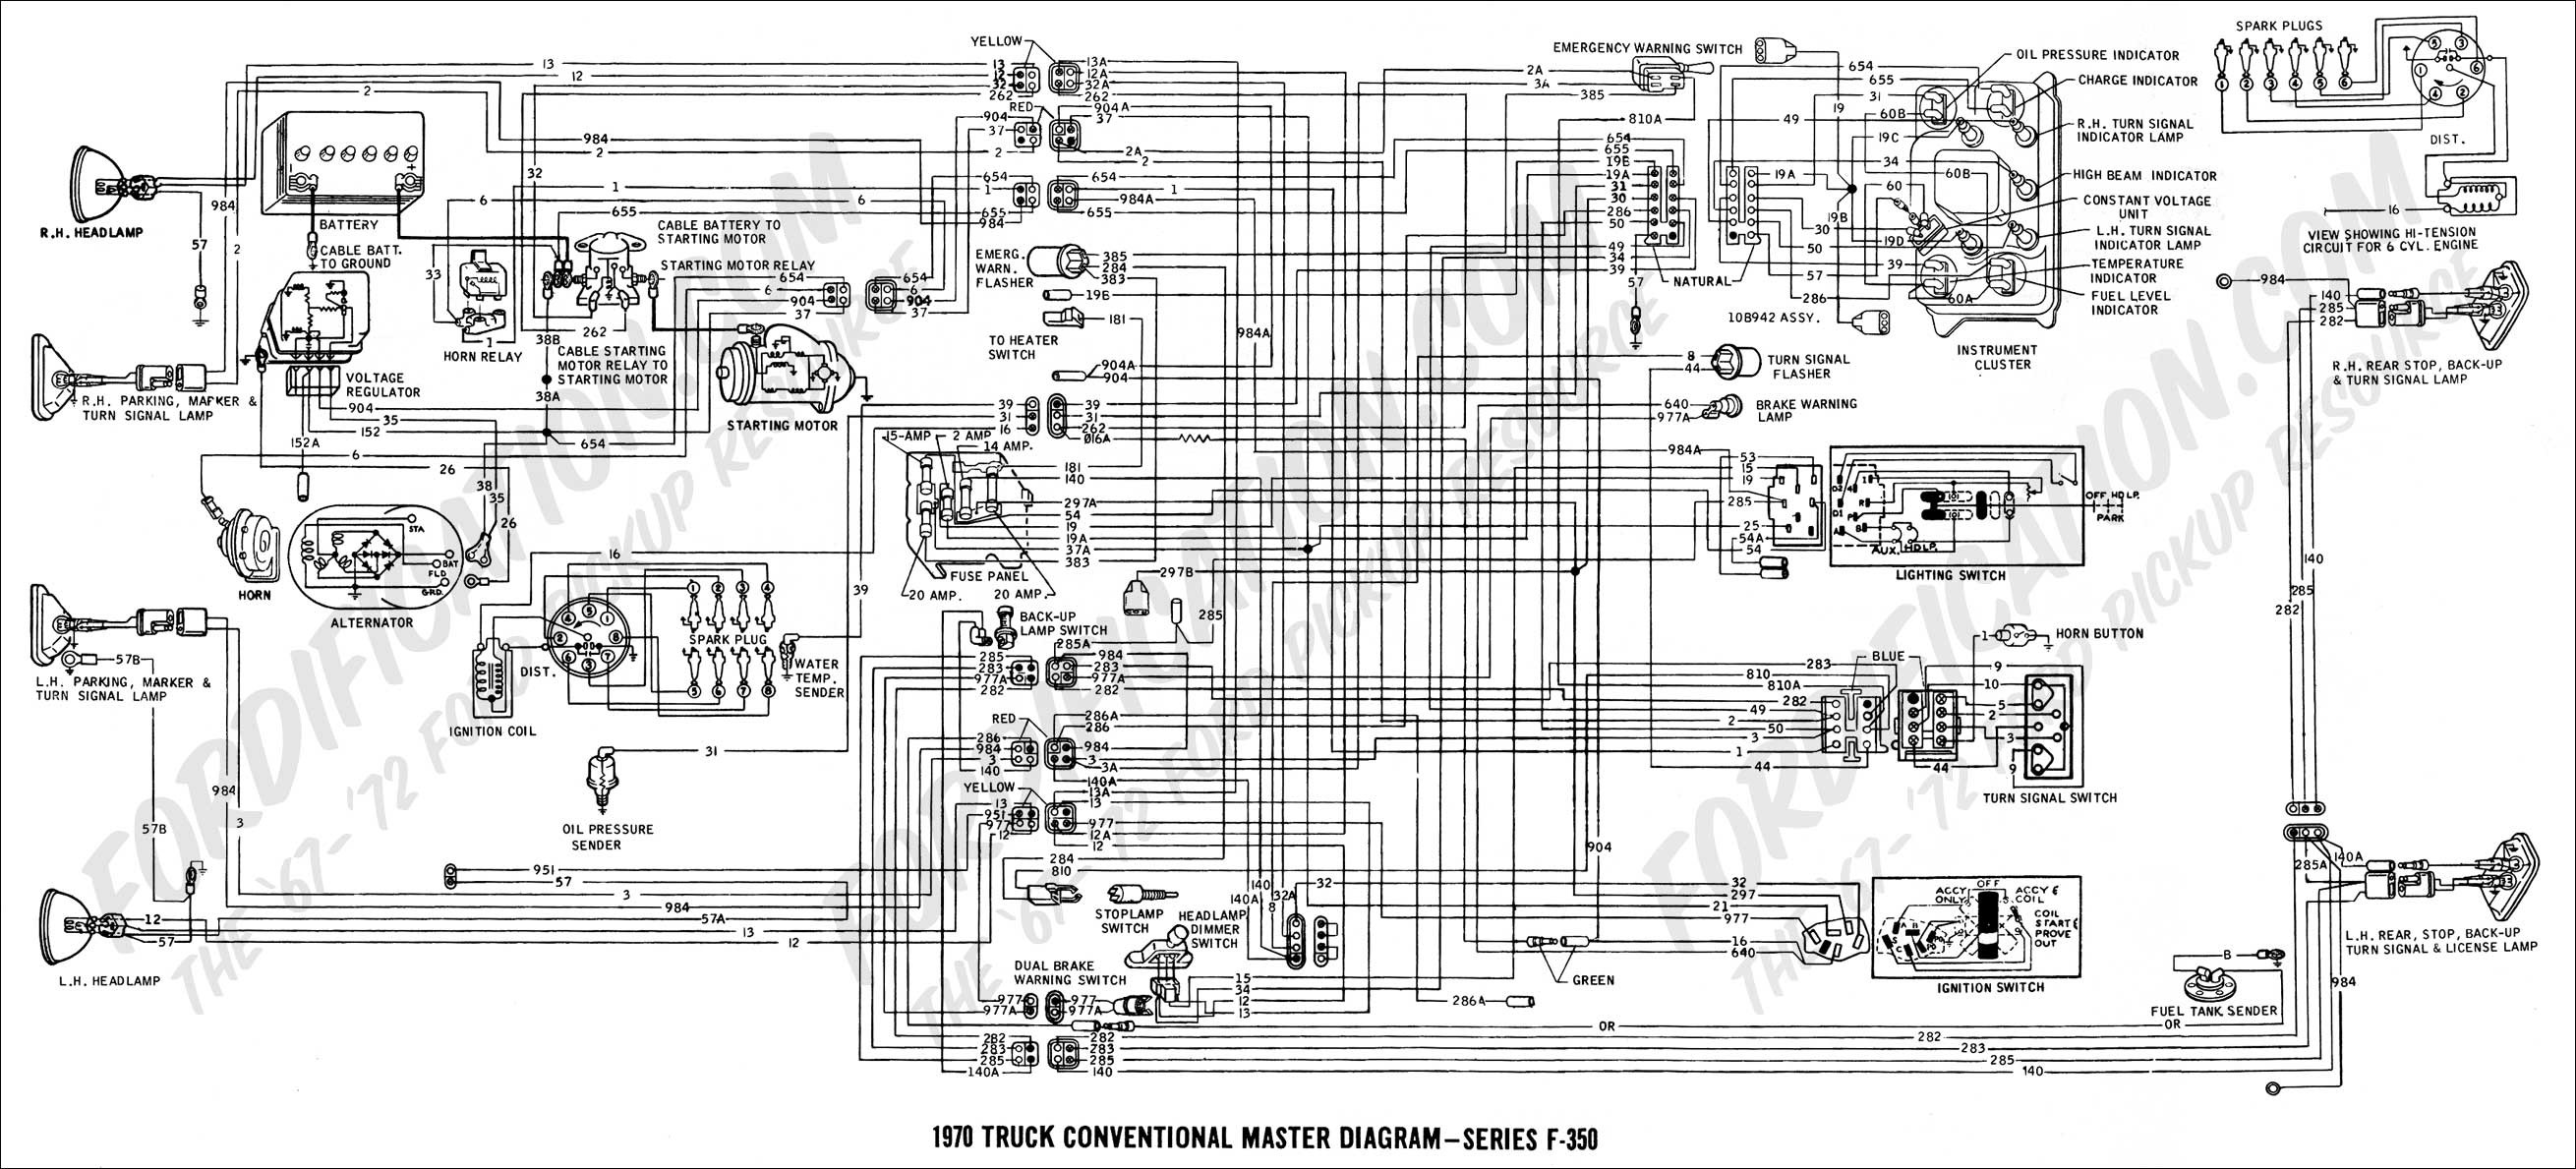 2002 Mustang Gt Engine Diagram to 2007 ford Mustang Wiring Diagram Wiring Diagram Of 2002 Mustang Gt Engine Diagram